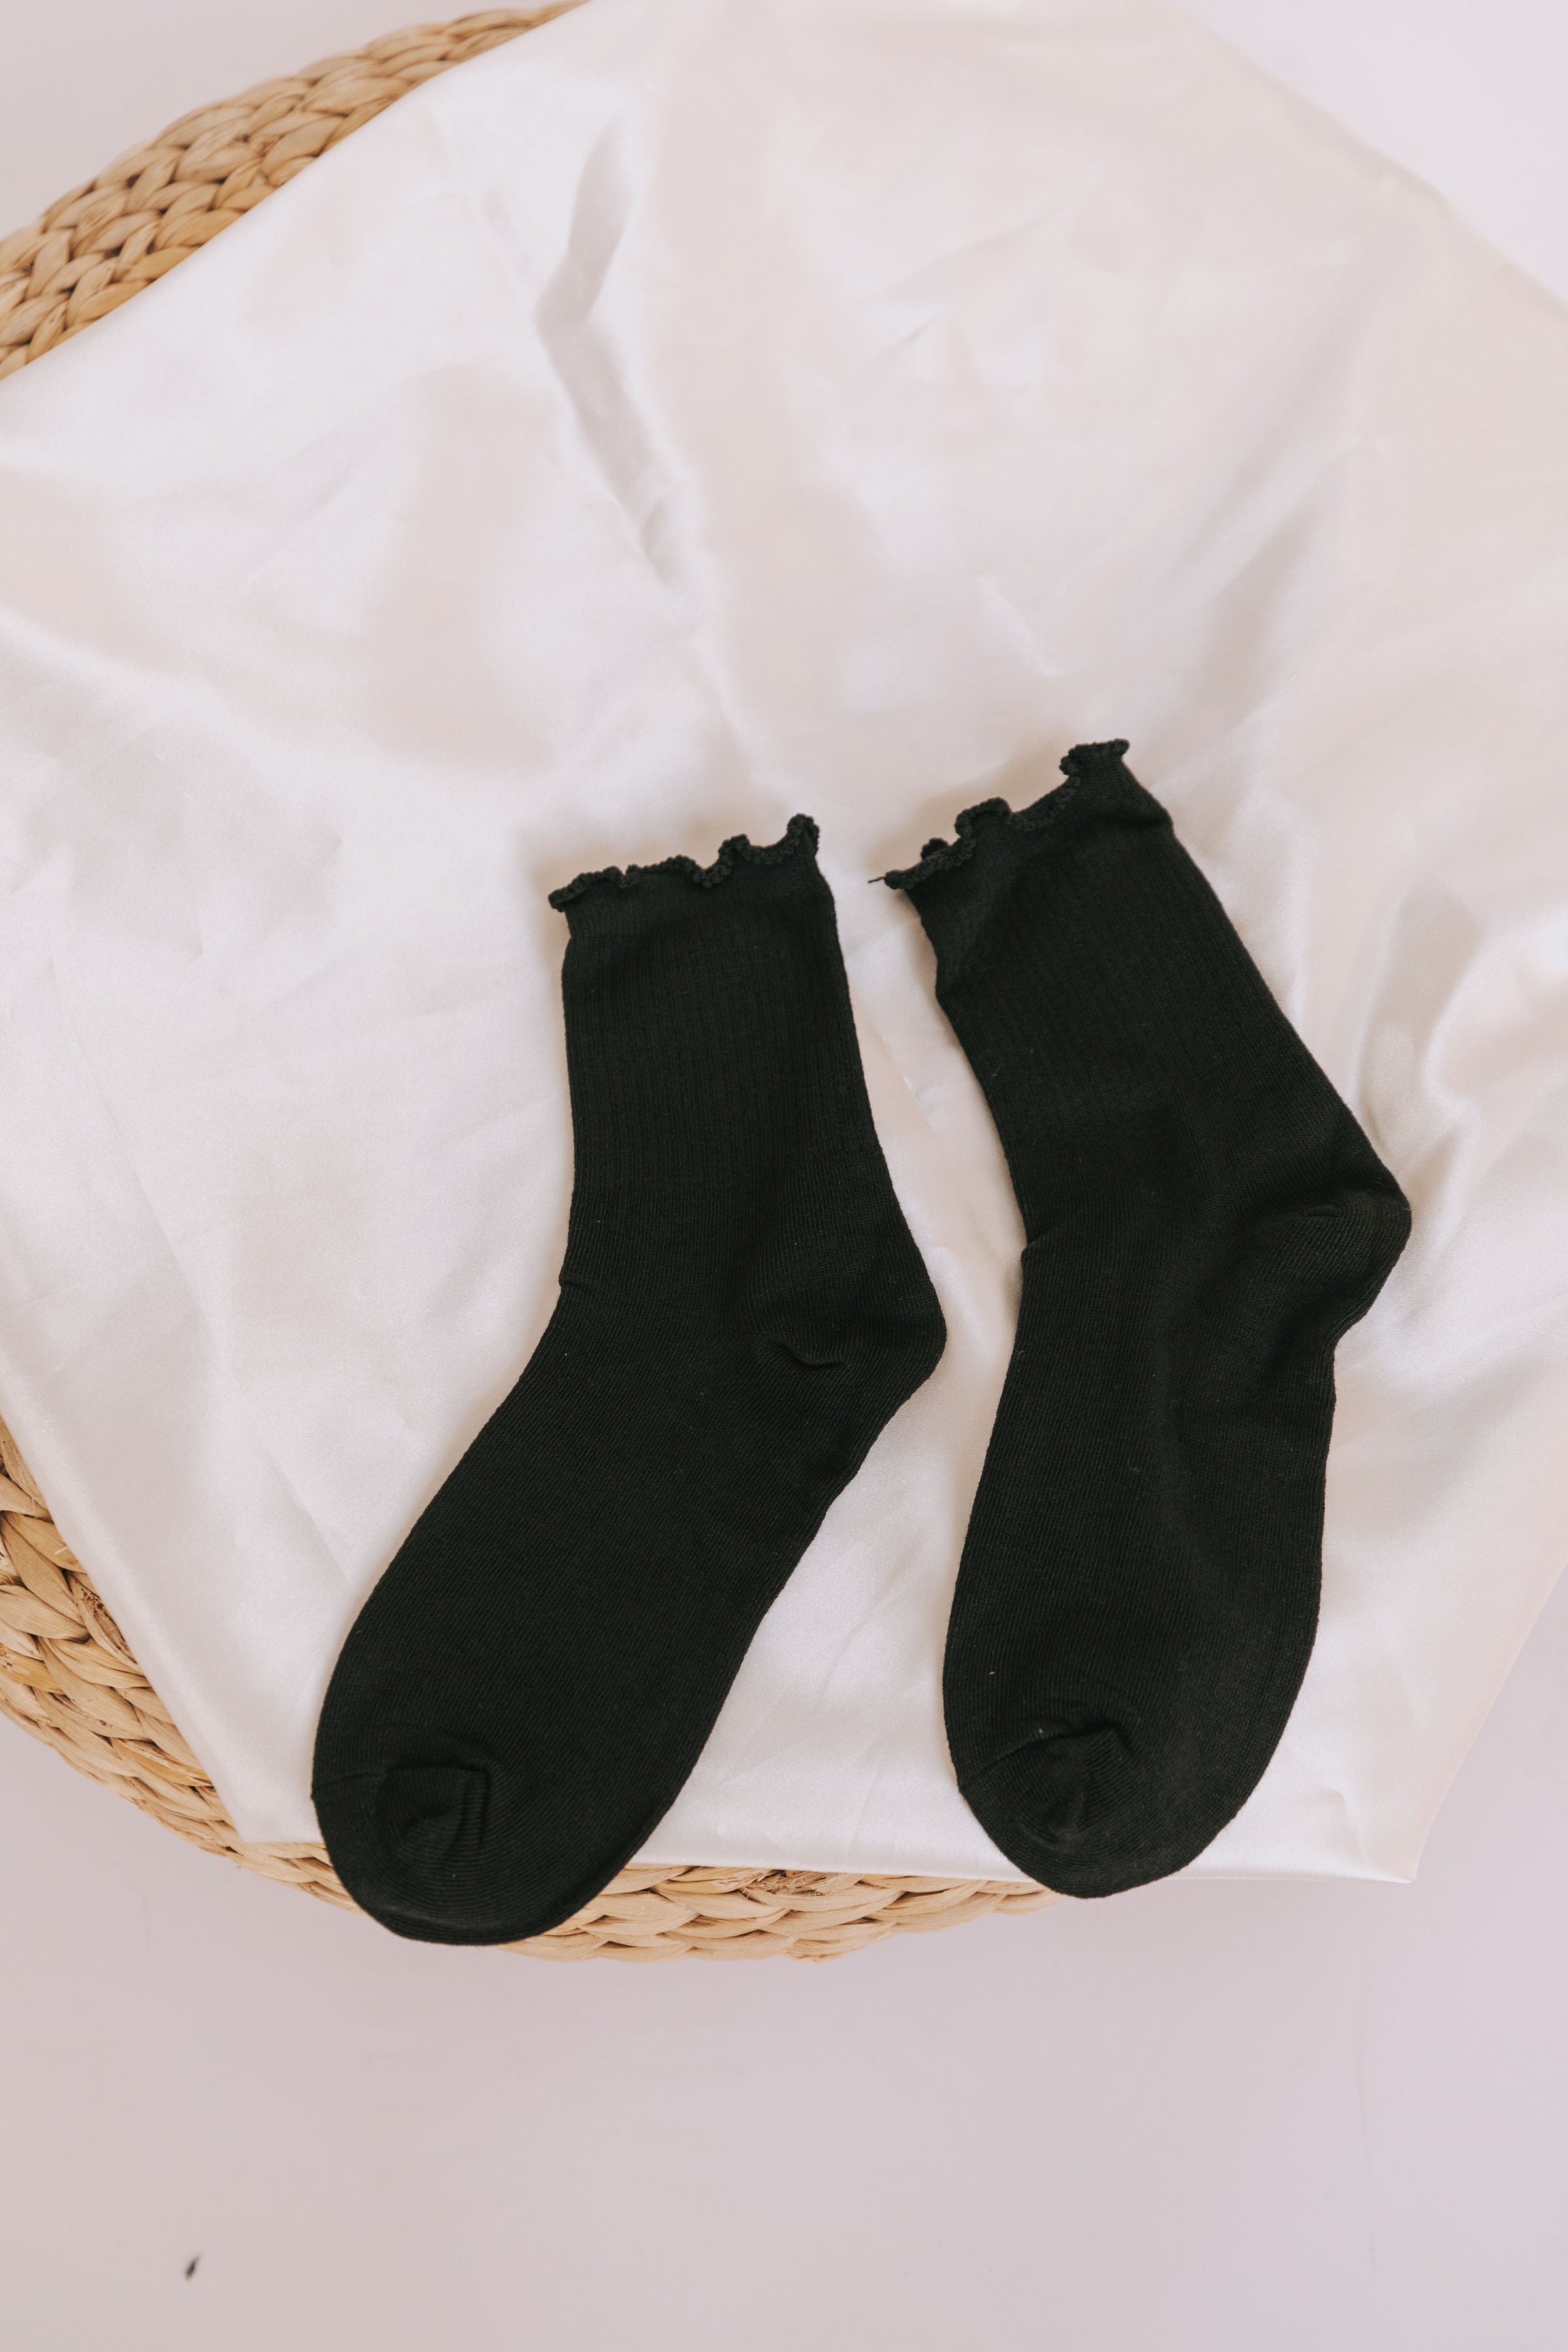 Going To Be A Good Day Socks - 6 Colors!